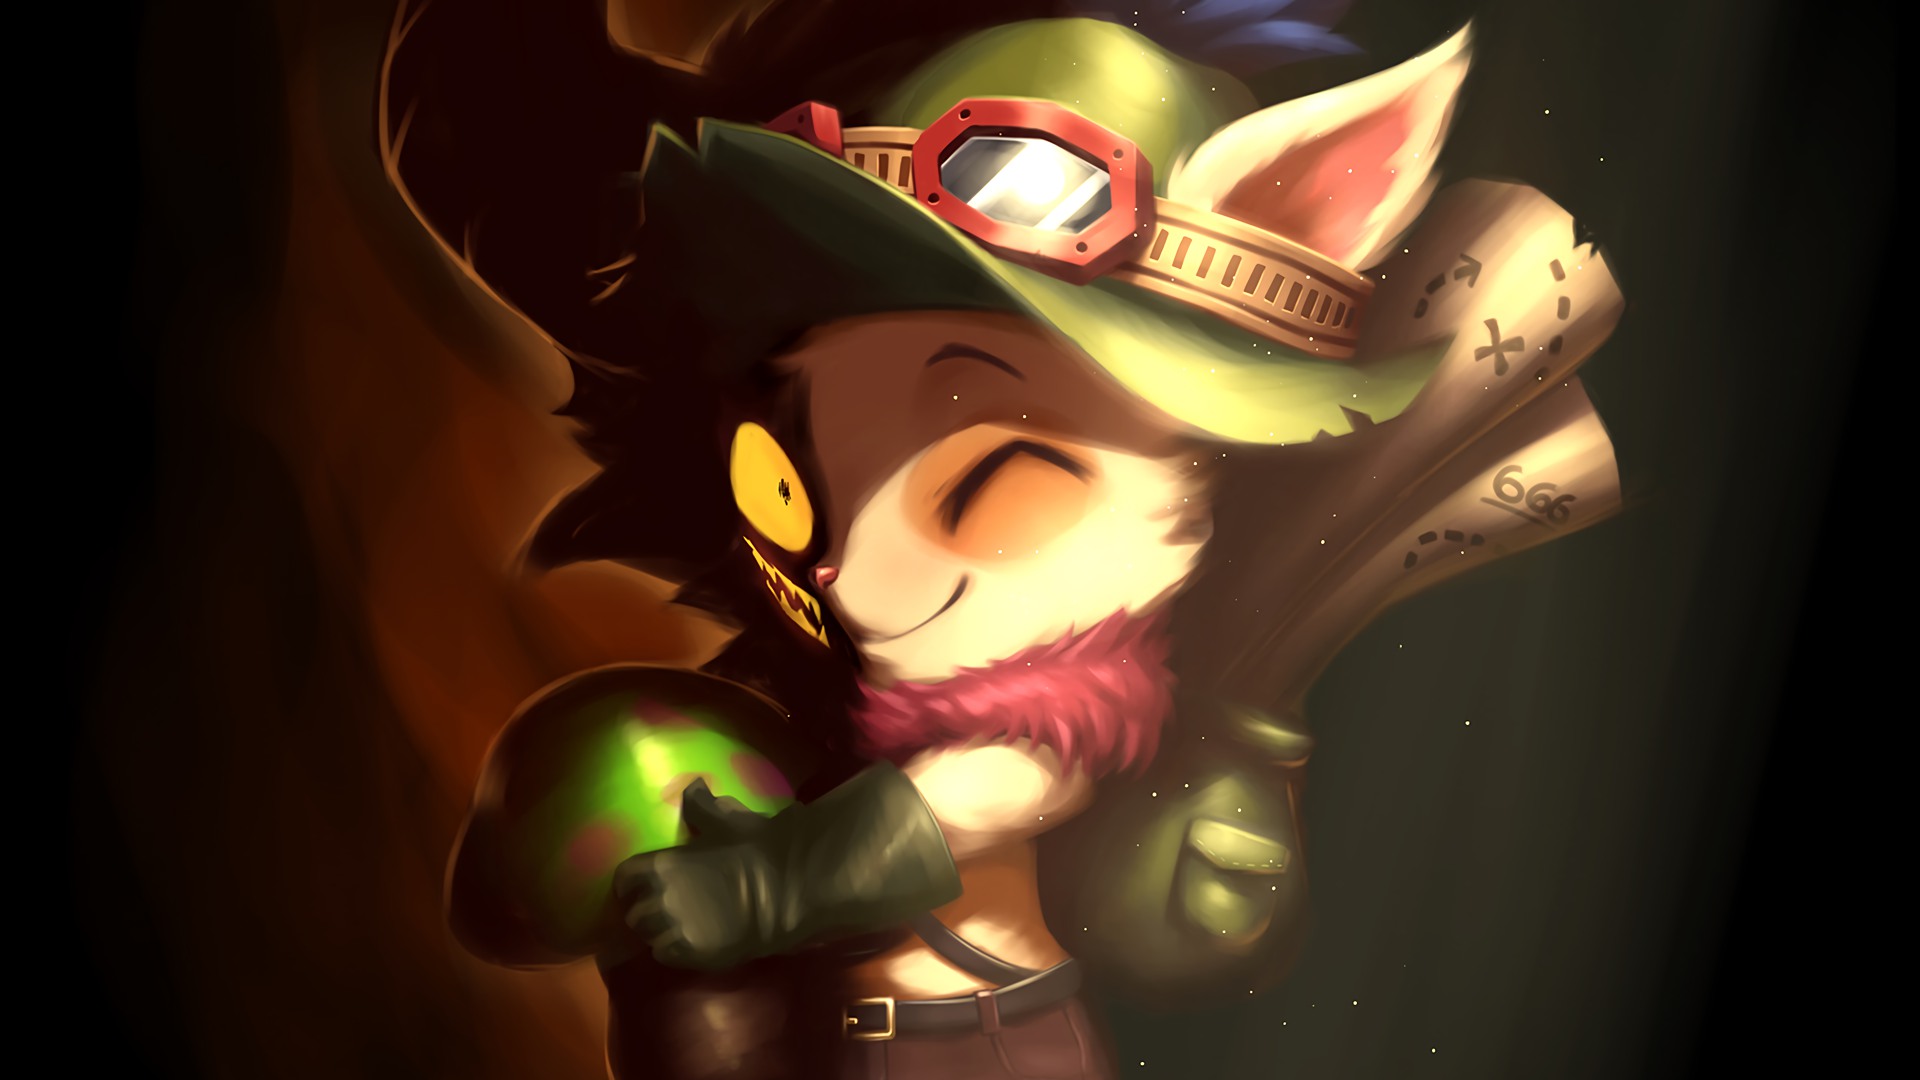 Wallpaper Teemo, League of legends, game, online game